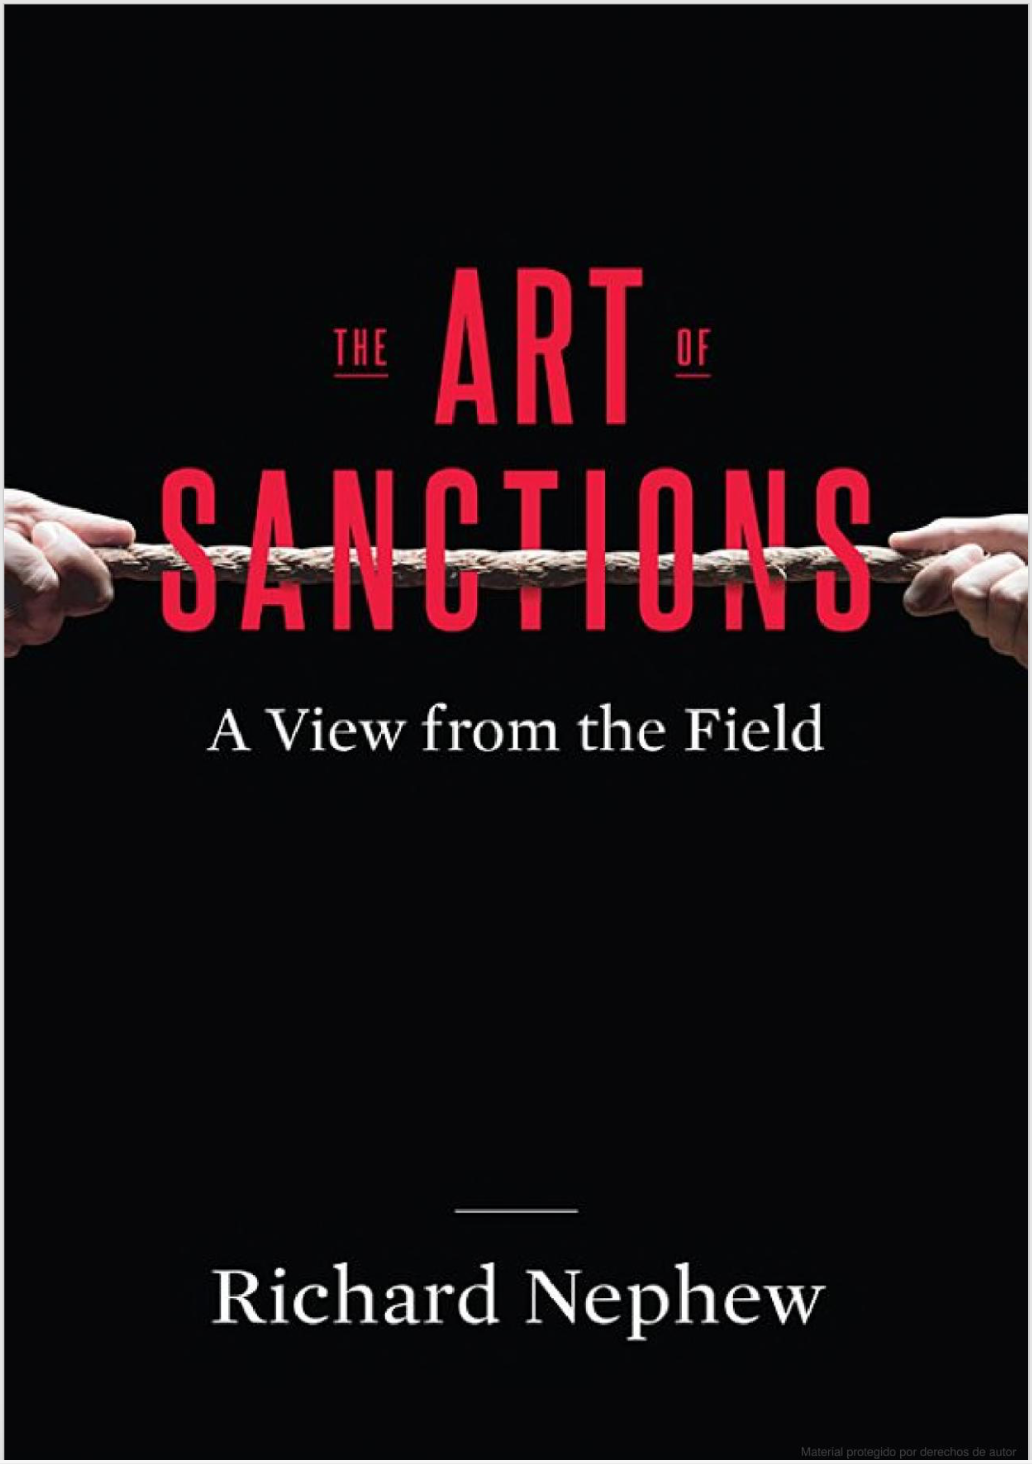 The Art of Sanctions. A View from the Field